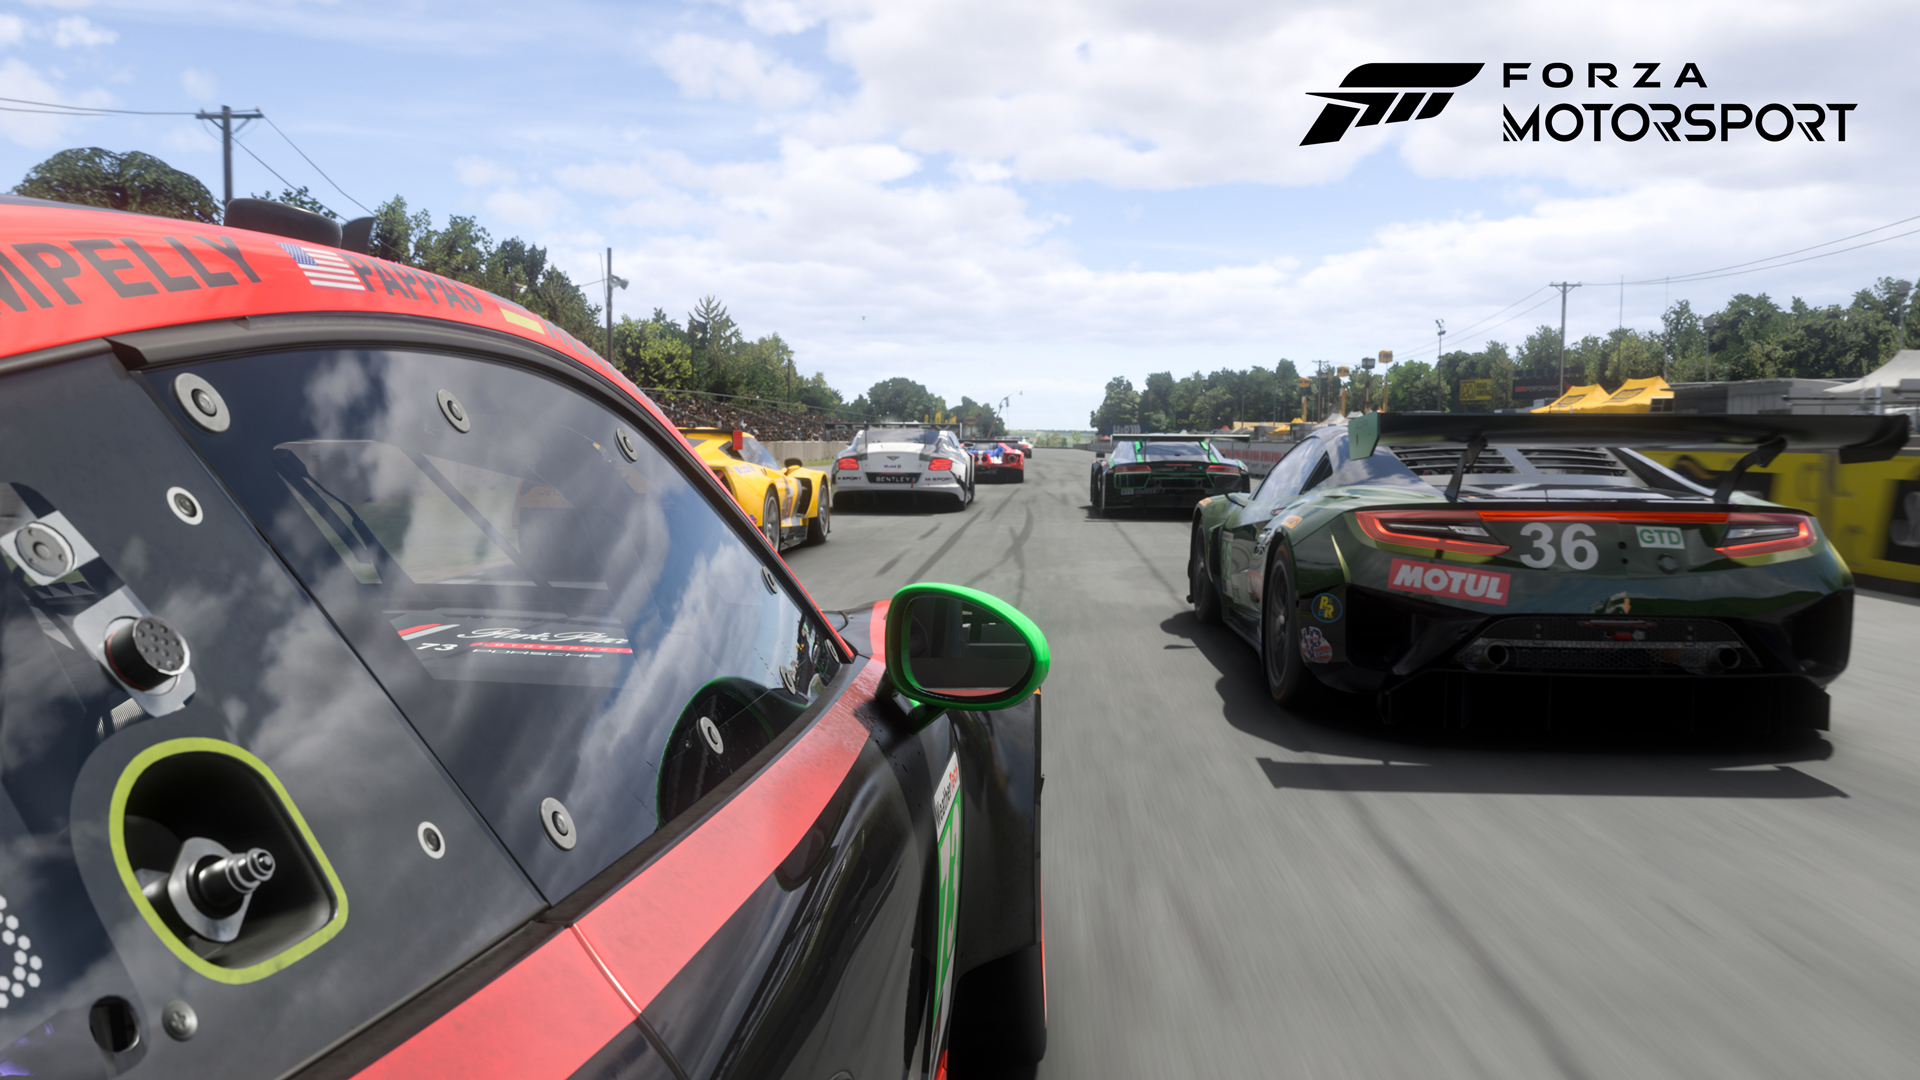 Forza Motorsport adds RPG-style progression and better physics to